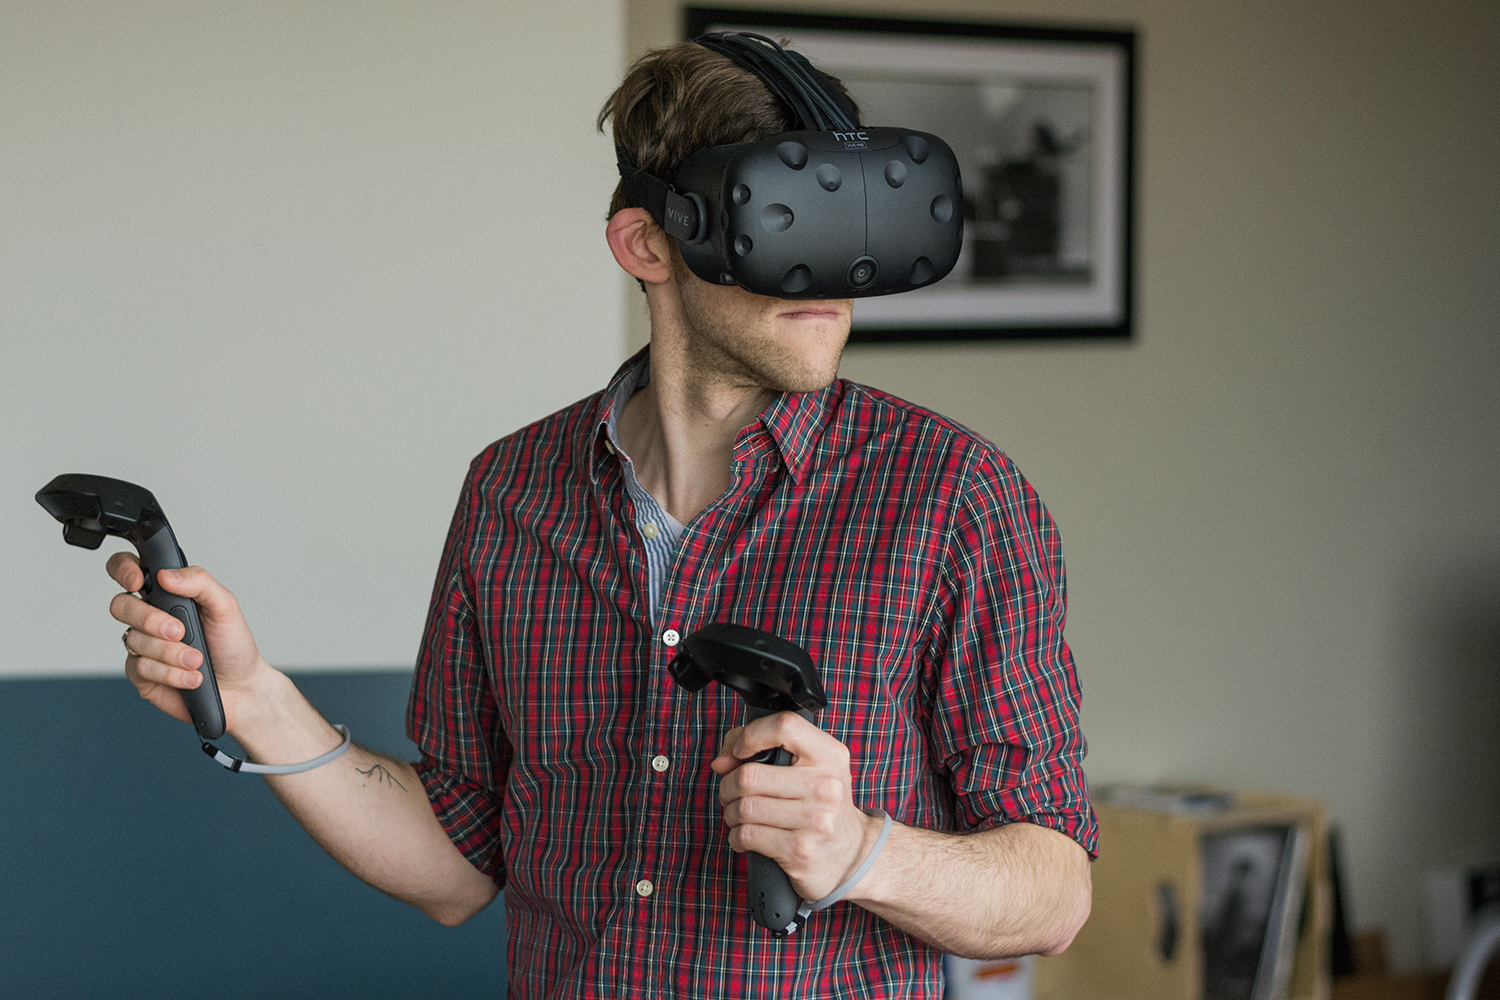 Steam Now Supports Streaming VR Games Digital Trends